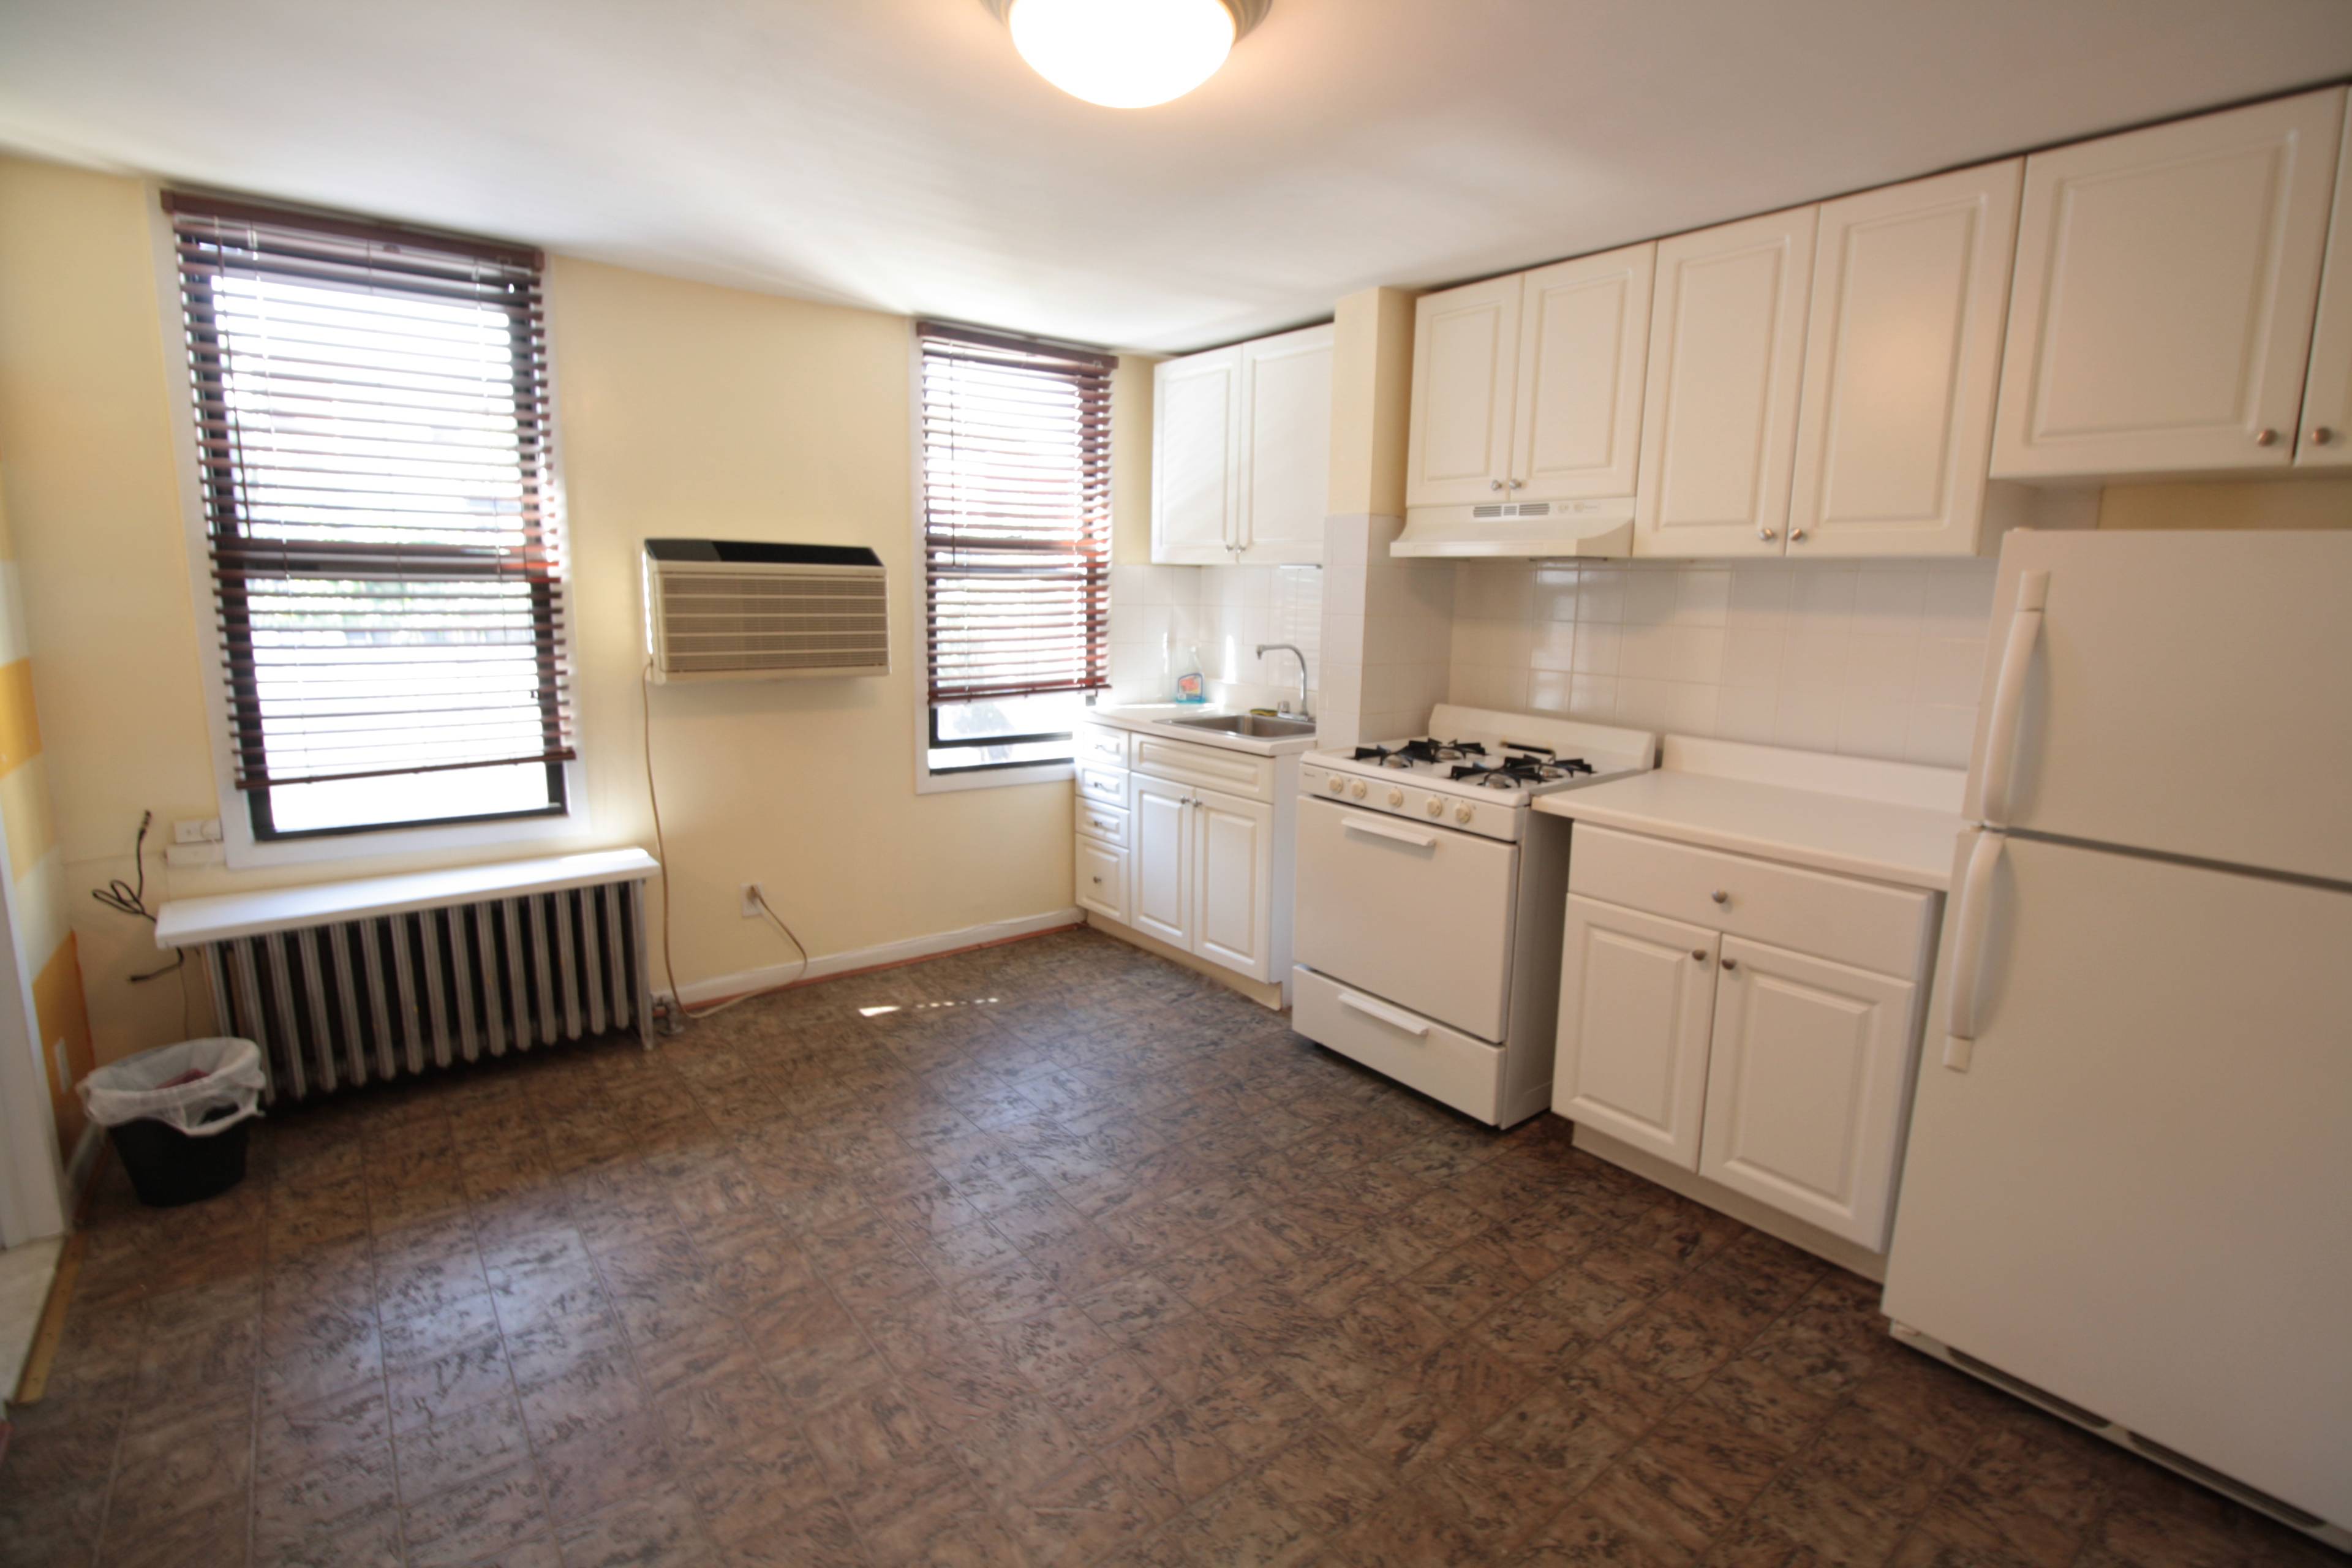 SPACIOUS 1 BED + Home Ofice for rent in a lovely private home in WIlliamsburg, Steps to the L Train!